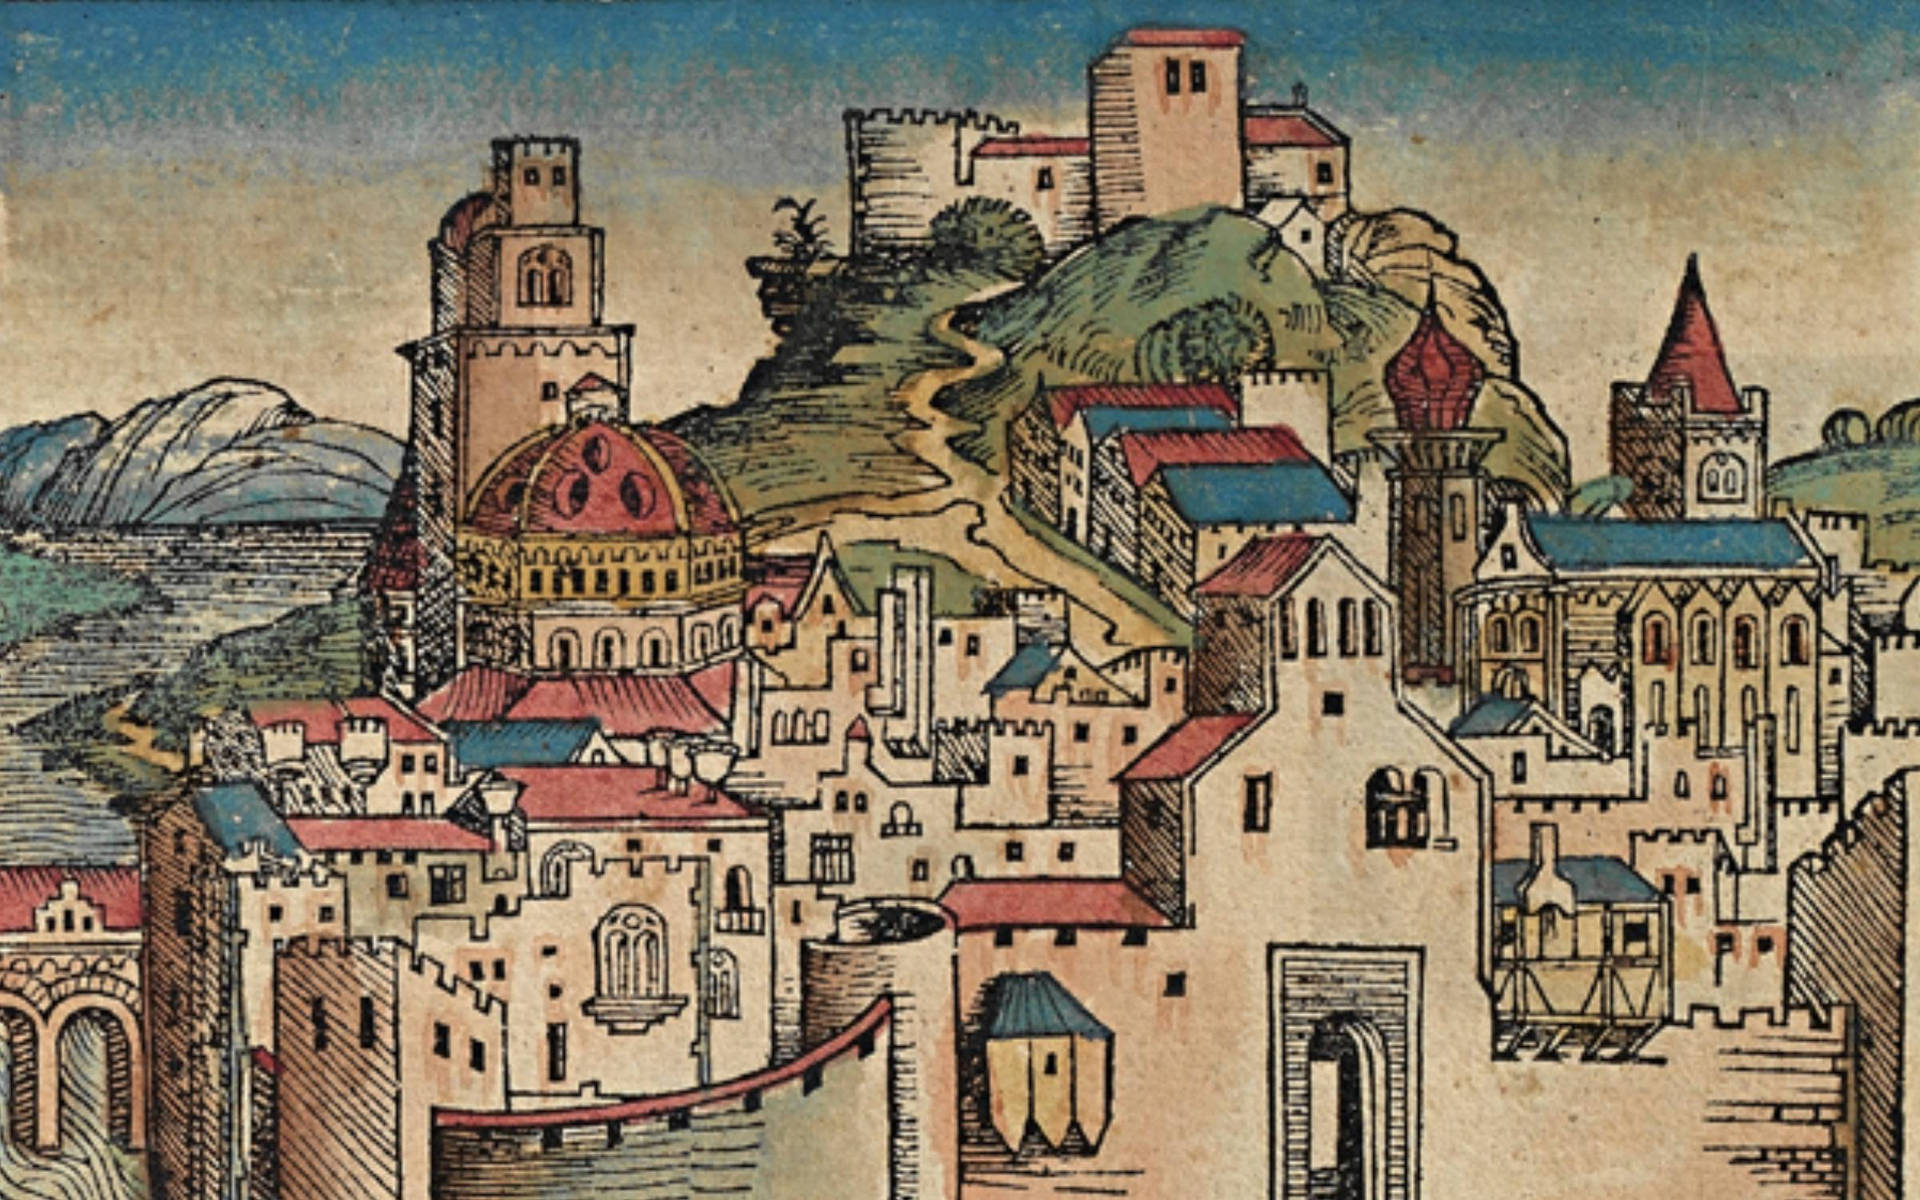 "Ancient Carthage from the Nuremberg Chronicle illustration" Wallpaper